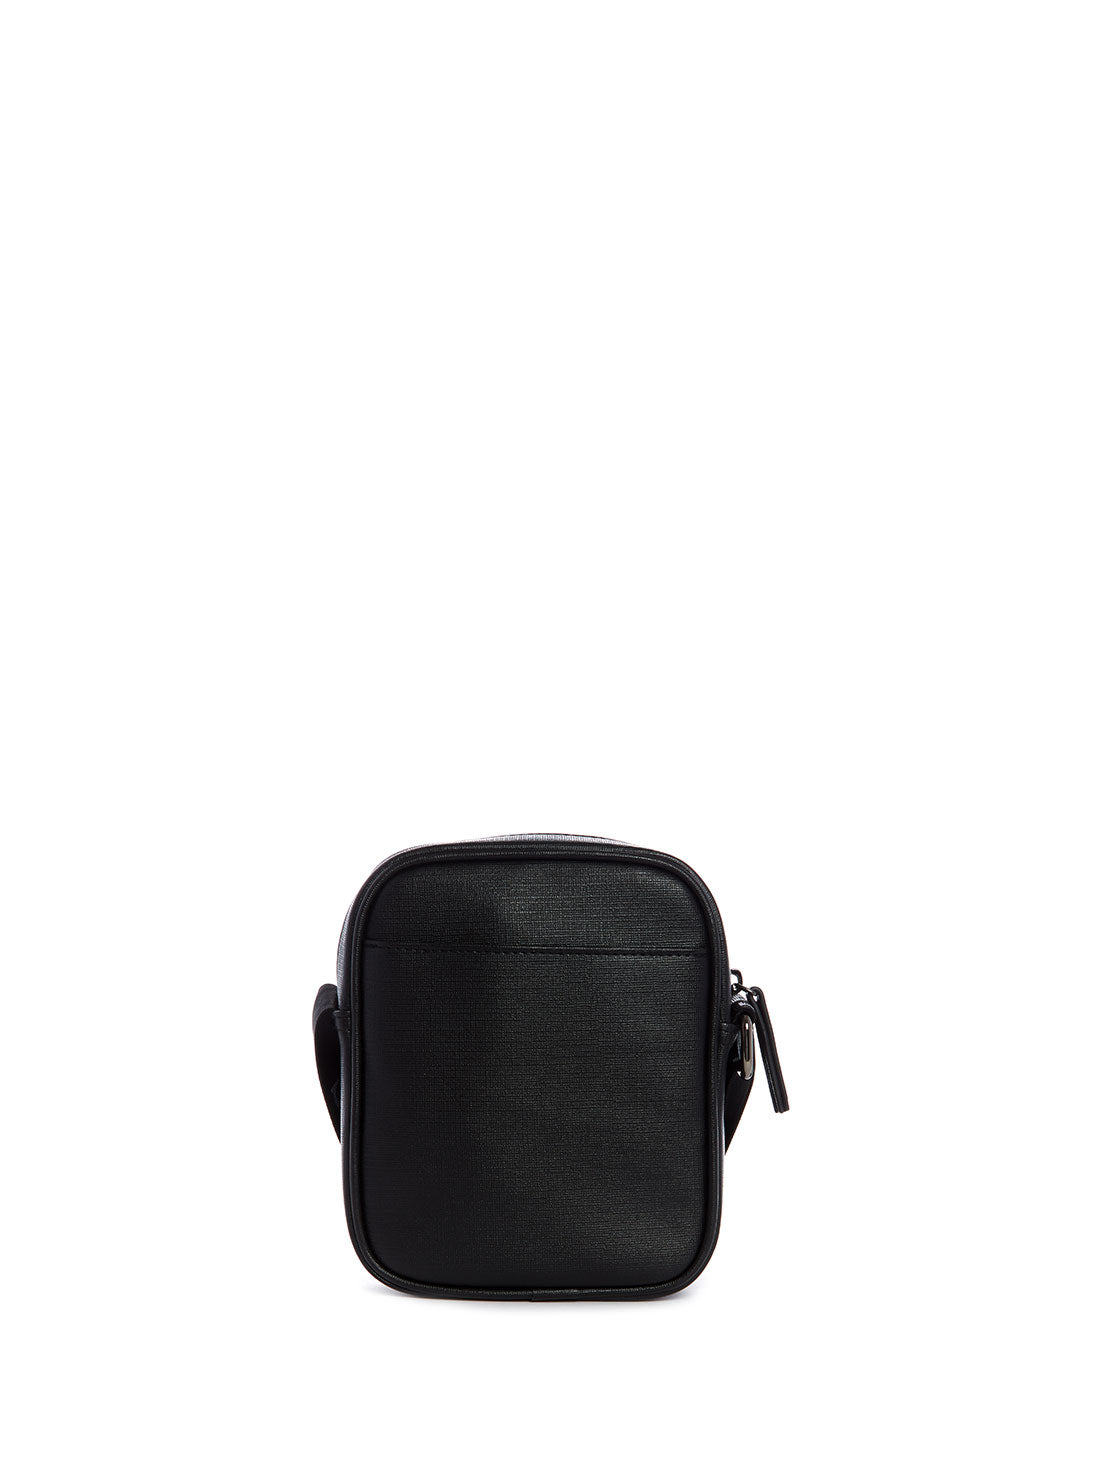 GUESS Men's Black Outfitter Crossbody Bag VY753592 Back View